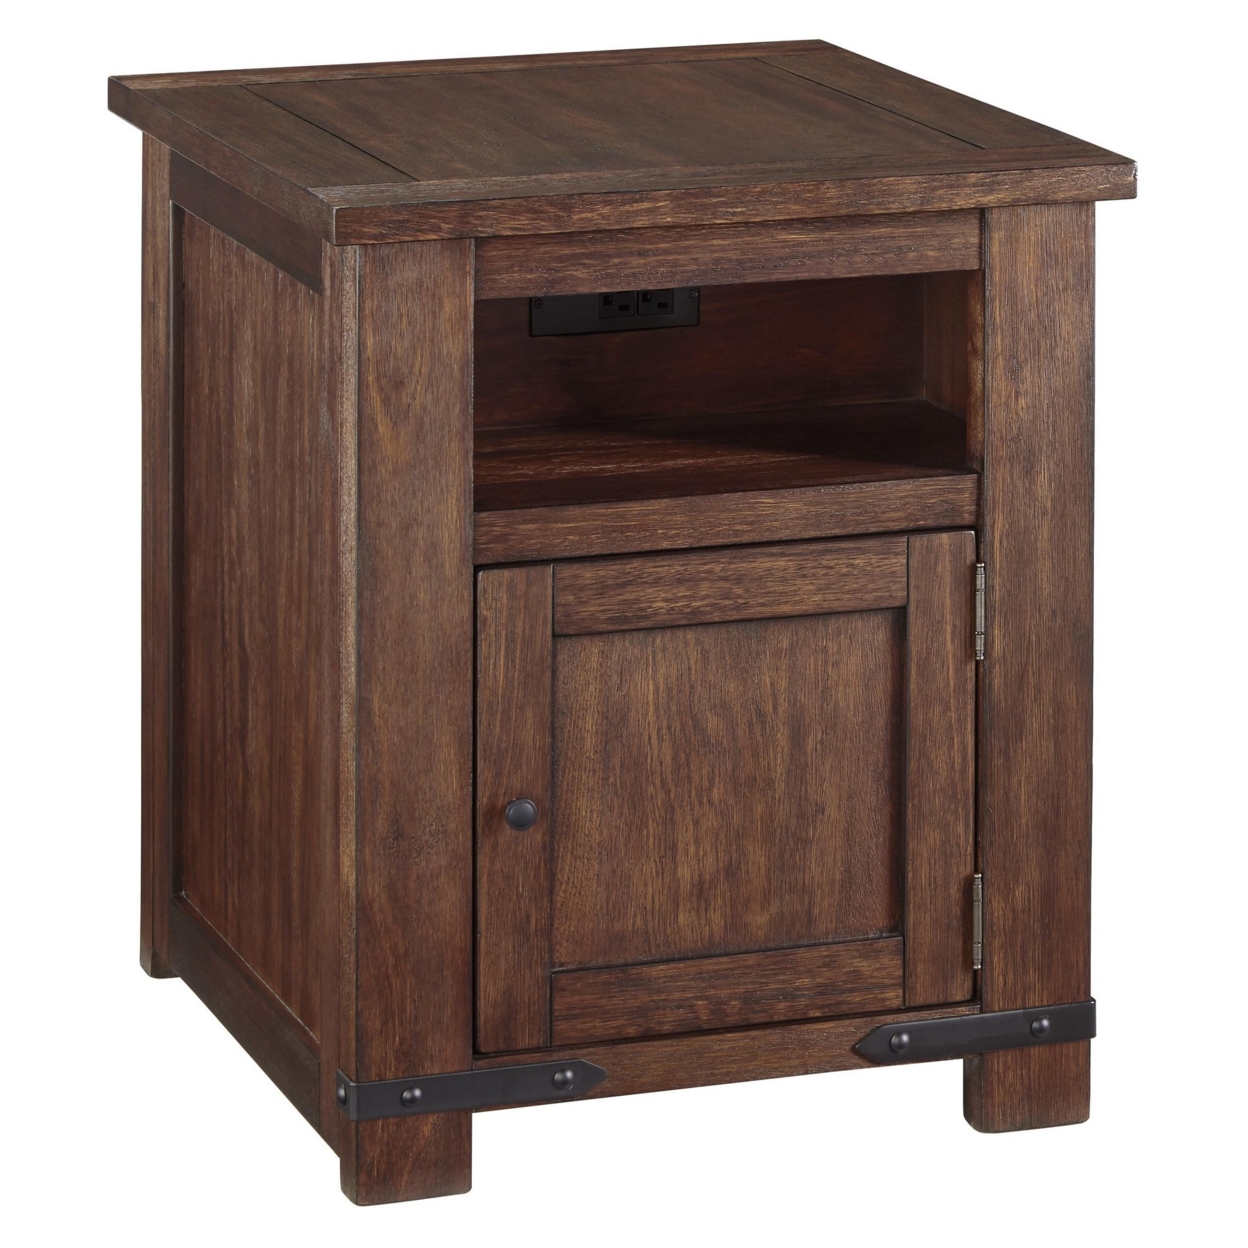 1 Door Wooden End Table With 1 Cubby And Power Hub, Brown- Saltoro Sherpi